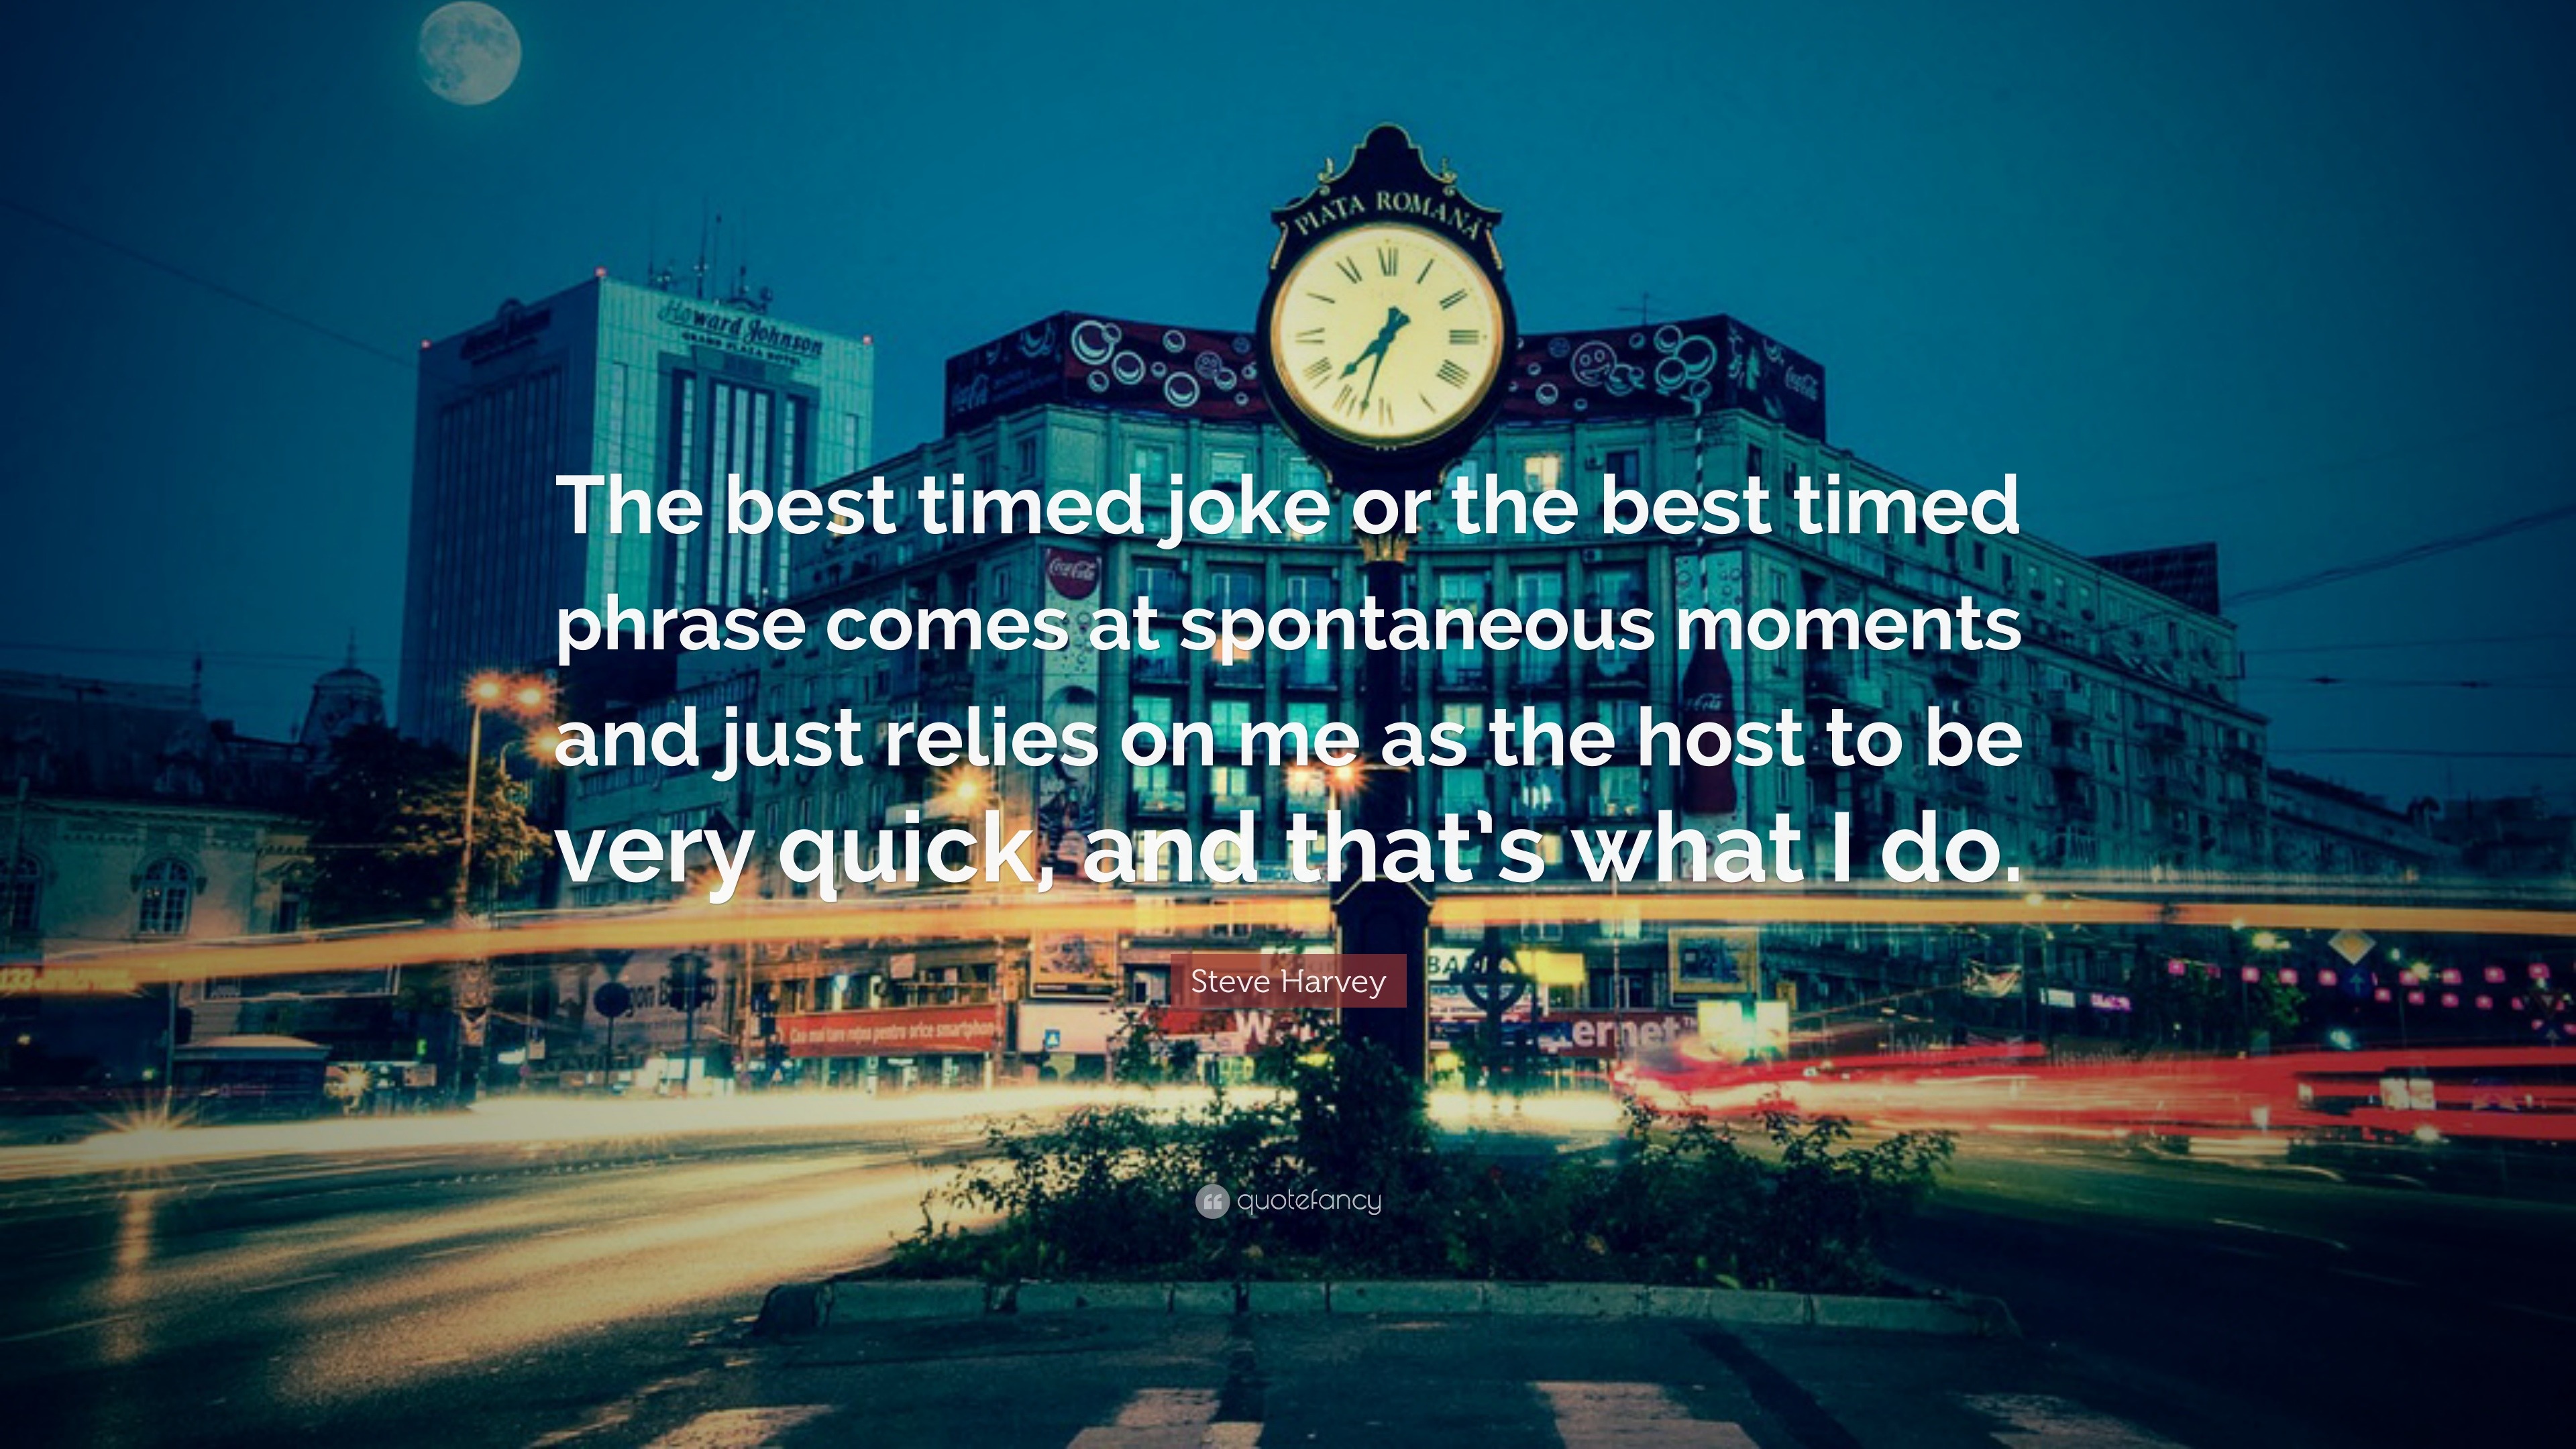 Steve Harvey Quote: “The best timed joke or the best timed phrase comes at  spontaneous moments and just relies on me as the host to be very q...”